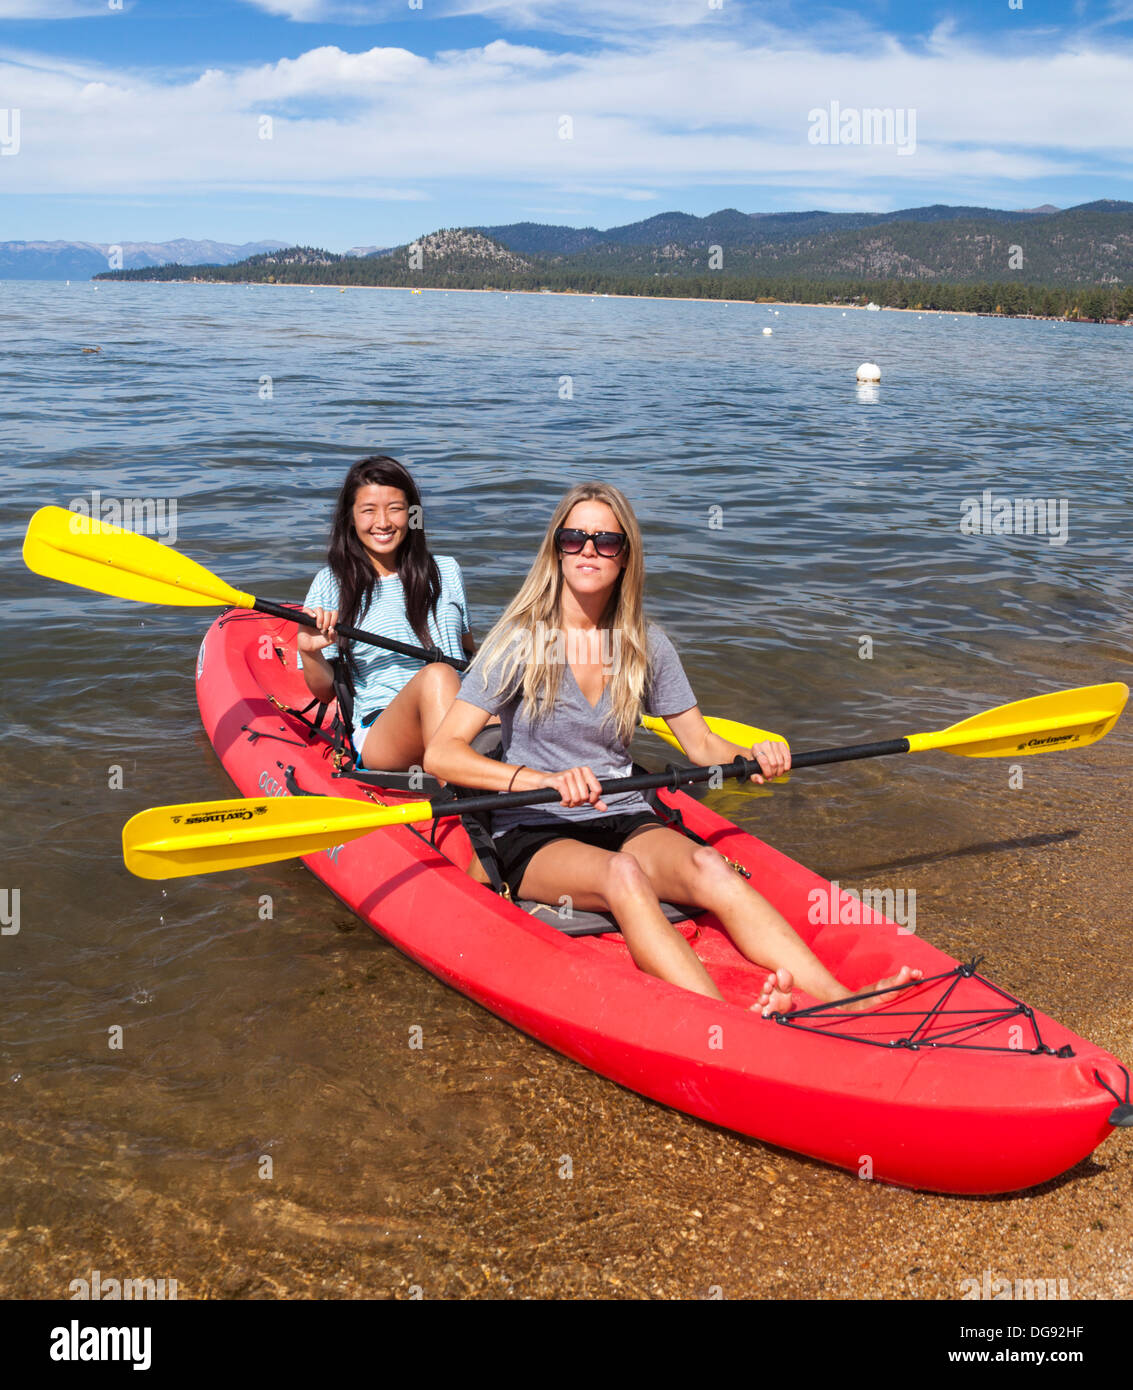 Two Person Kayak High Resolution Stock Photography and Images - Alamy